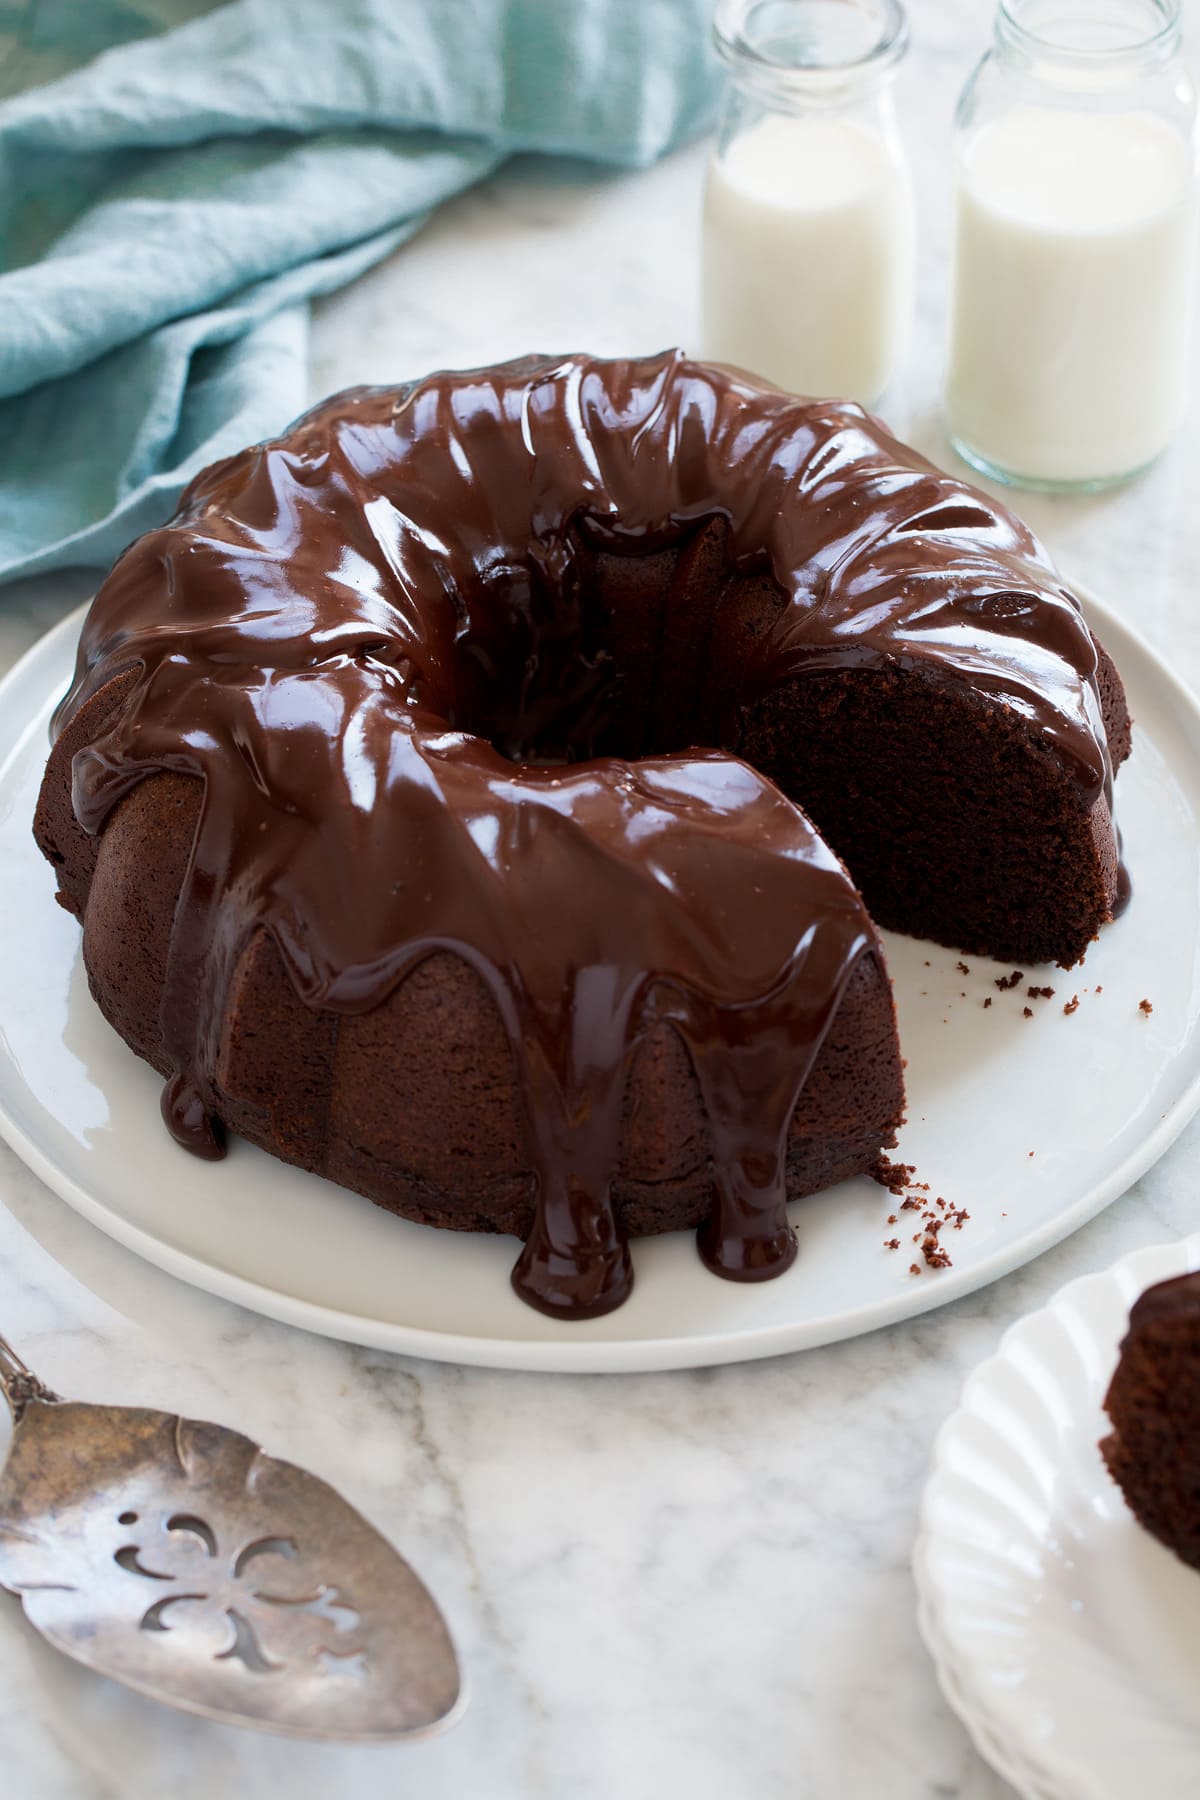 Whole chocolate bundt cake with one slice removed shown on a white platter with milk in the background and blue cloth.